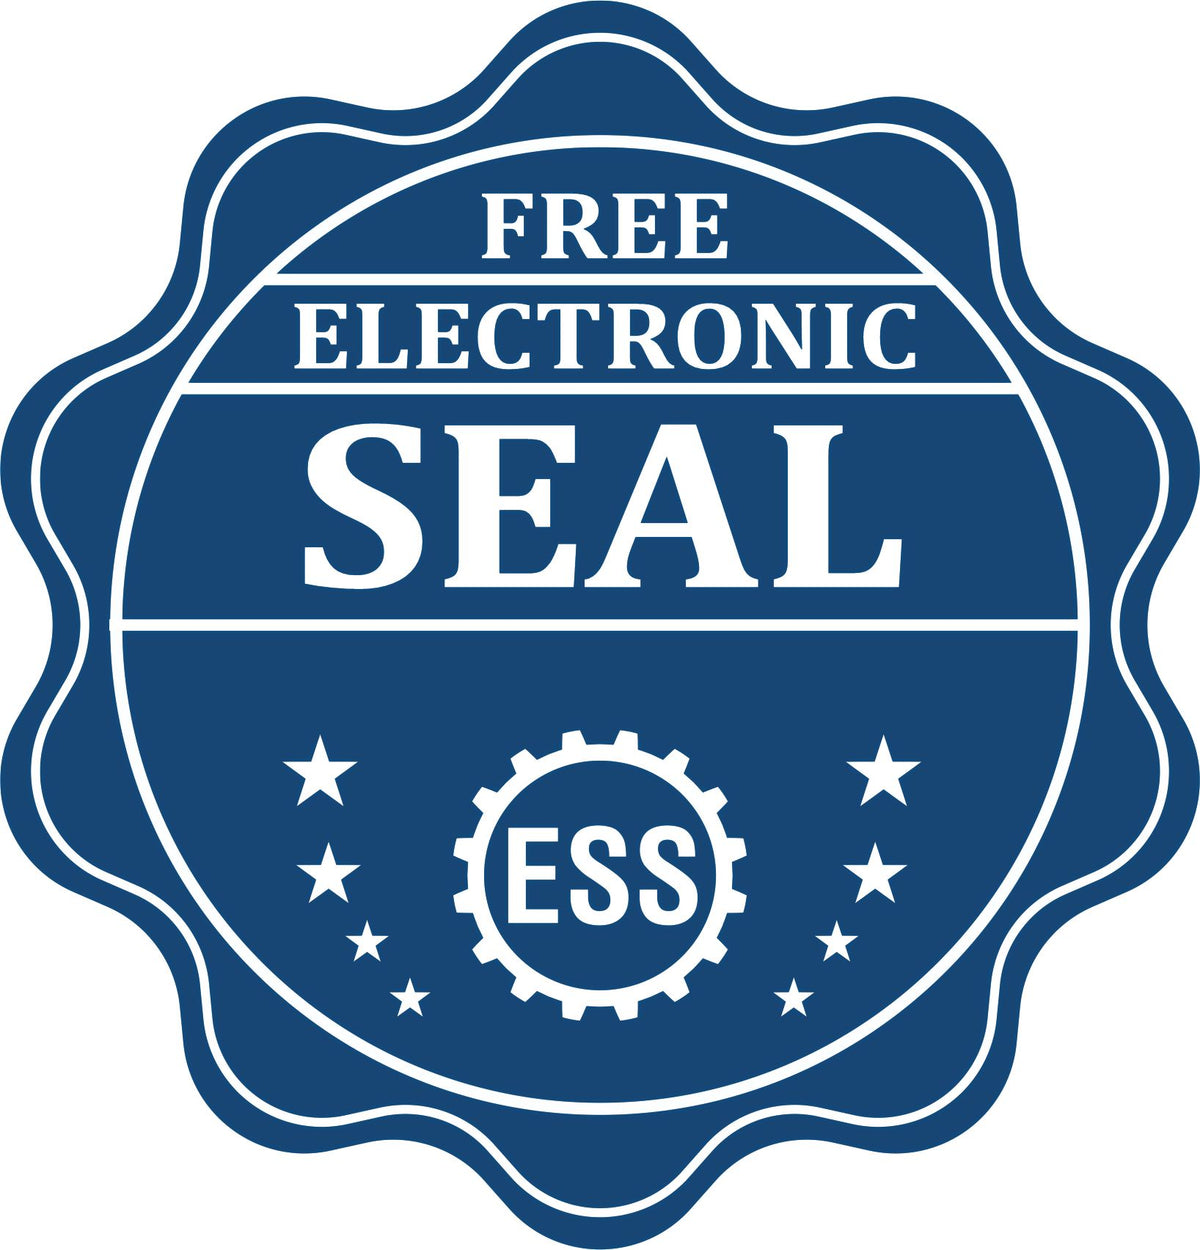 A badge showing a free electronic seal for the Slim Pre-Inked Rectangular Notary Stamp for Florida with stars and the ESS gear on the emblem.